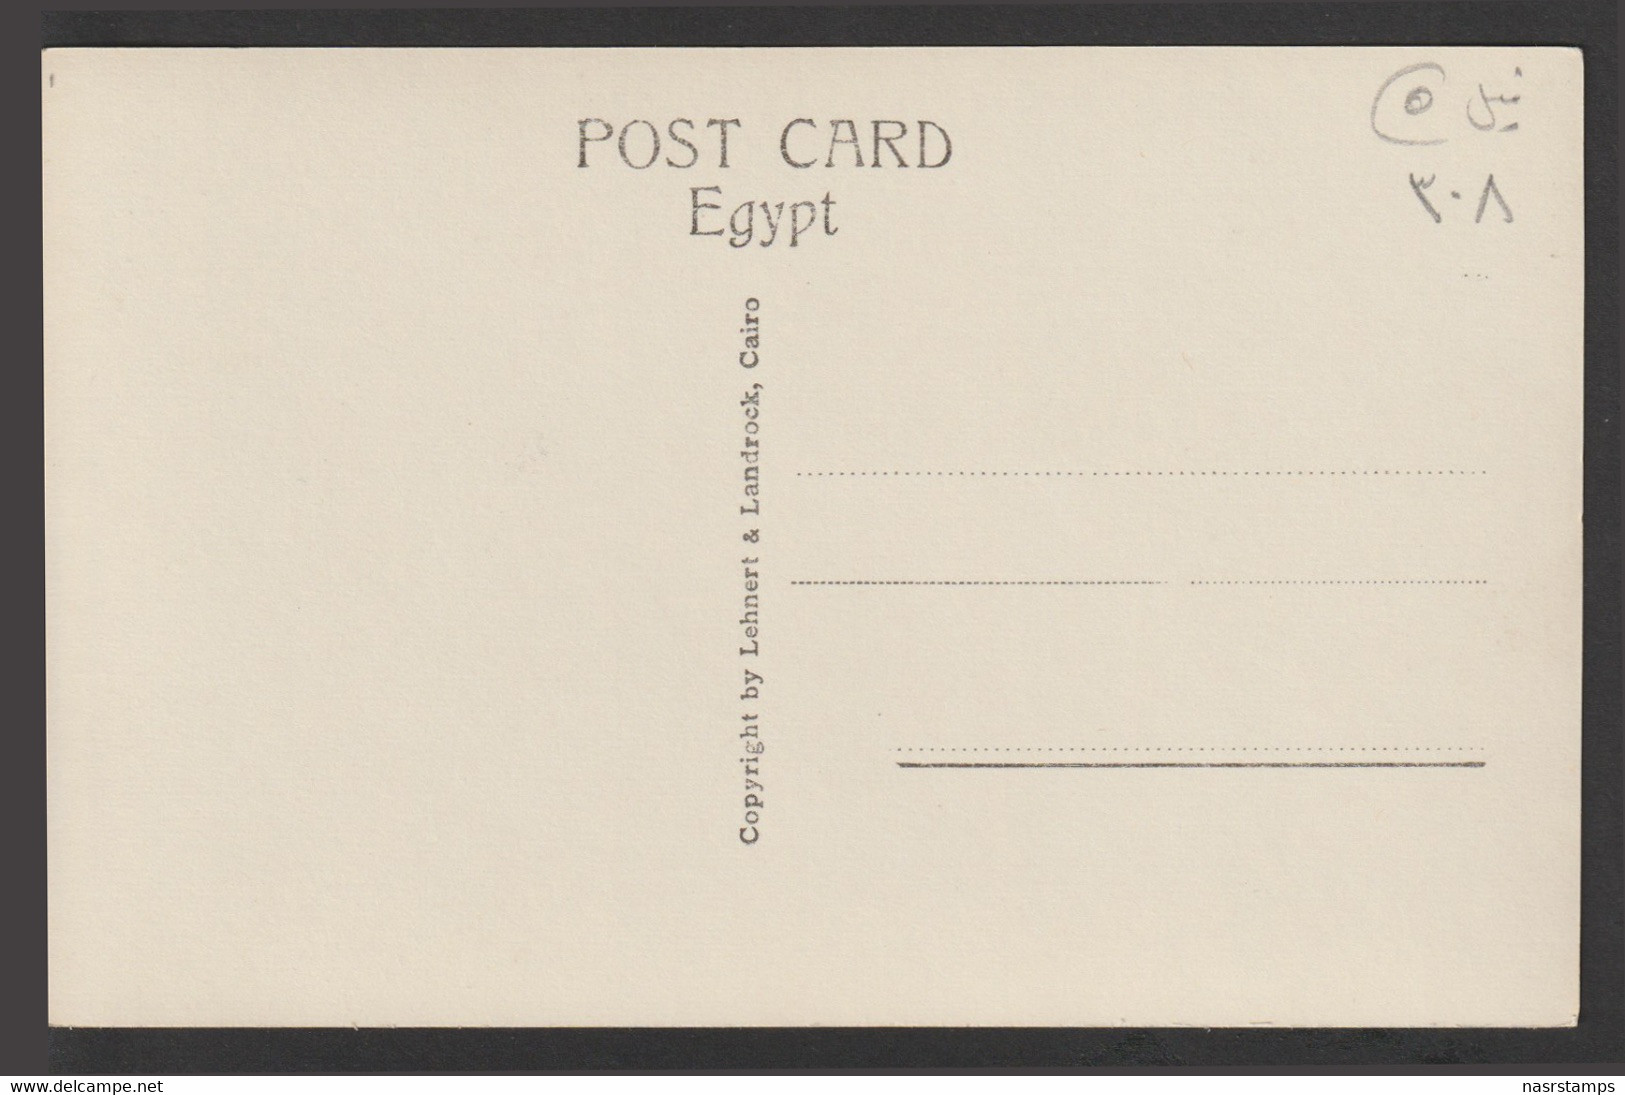 Egypt - Rare - Vintage Post Card - Woden Heads - Cairo Museum - Lettres & Documents